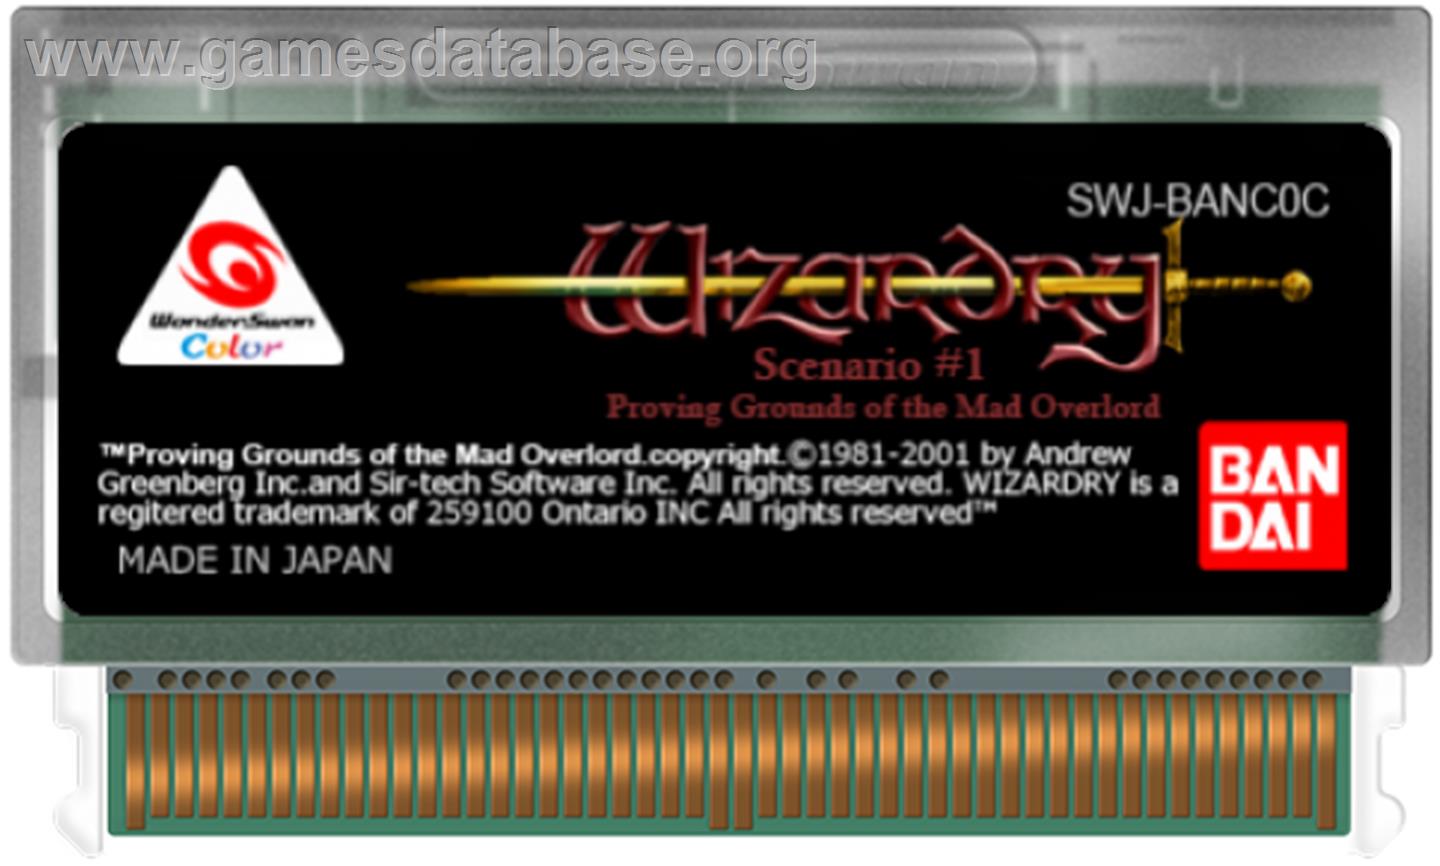 Wizardry: Proving Grounds of the Mad Overlord - Bandai WonderSwan Color - Artwork - Cartridge